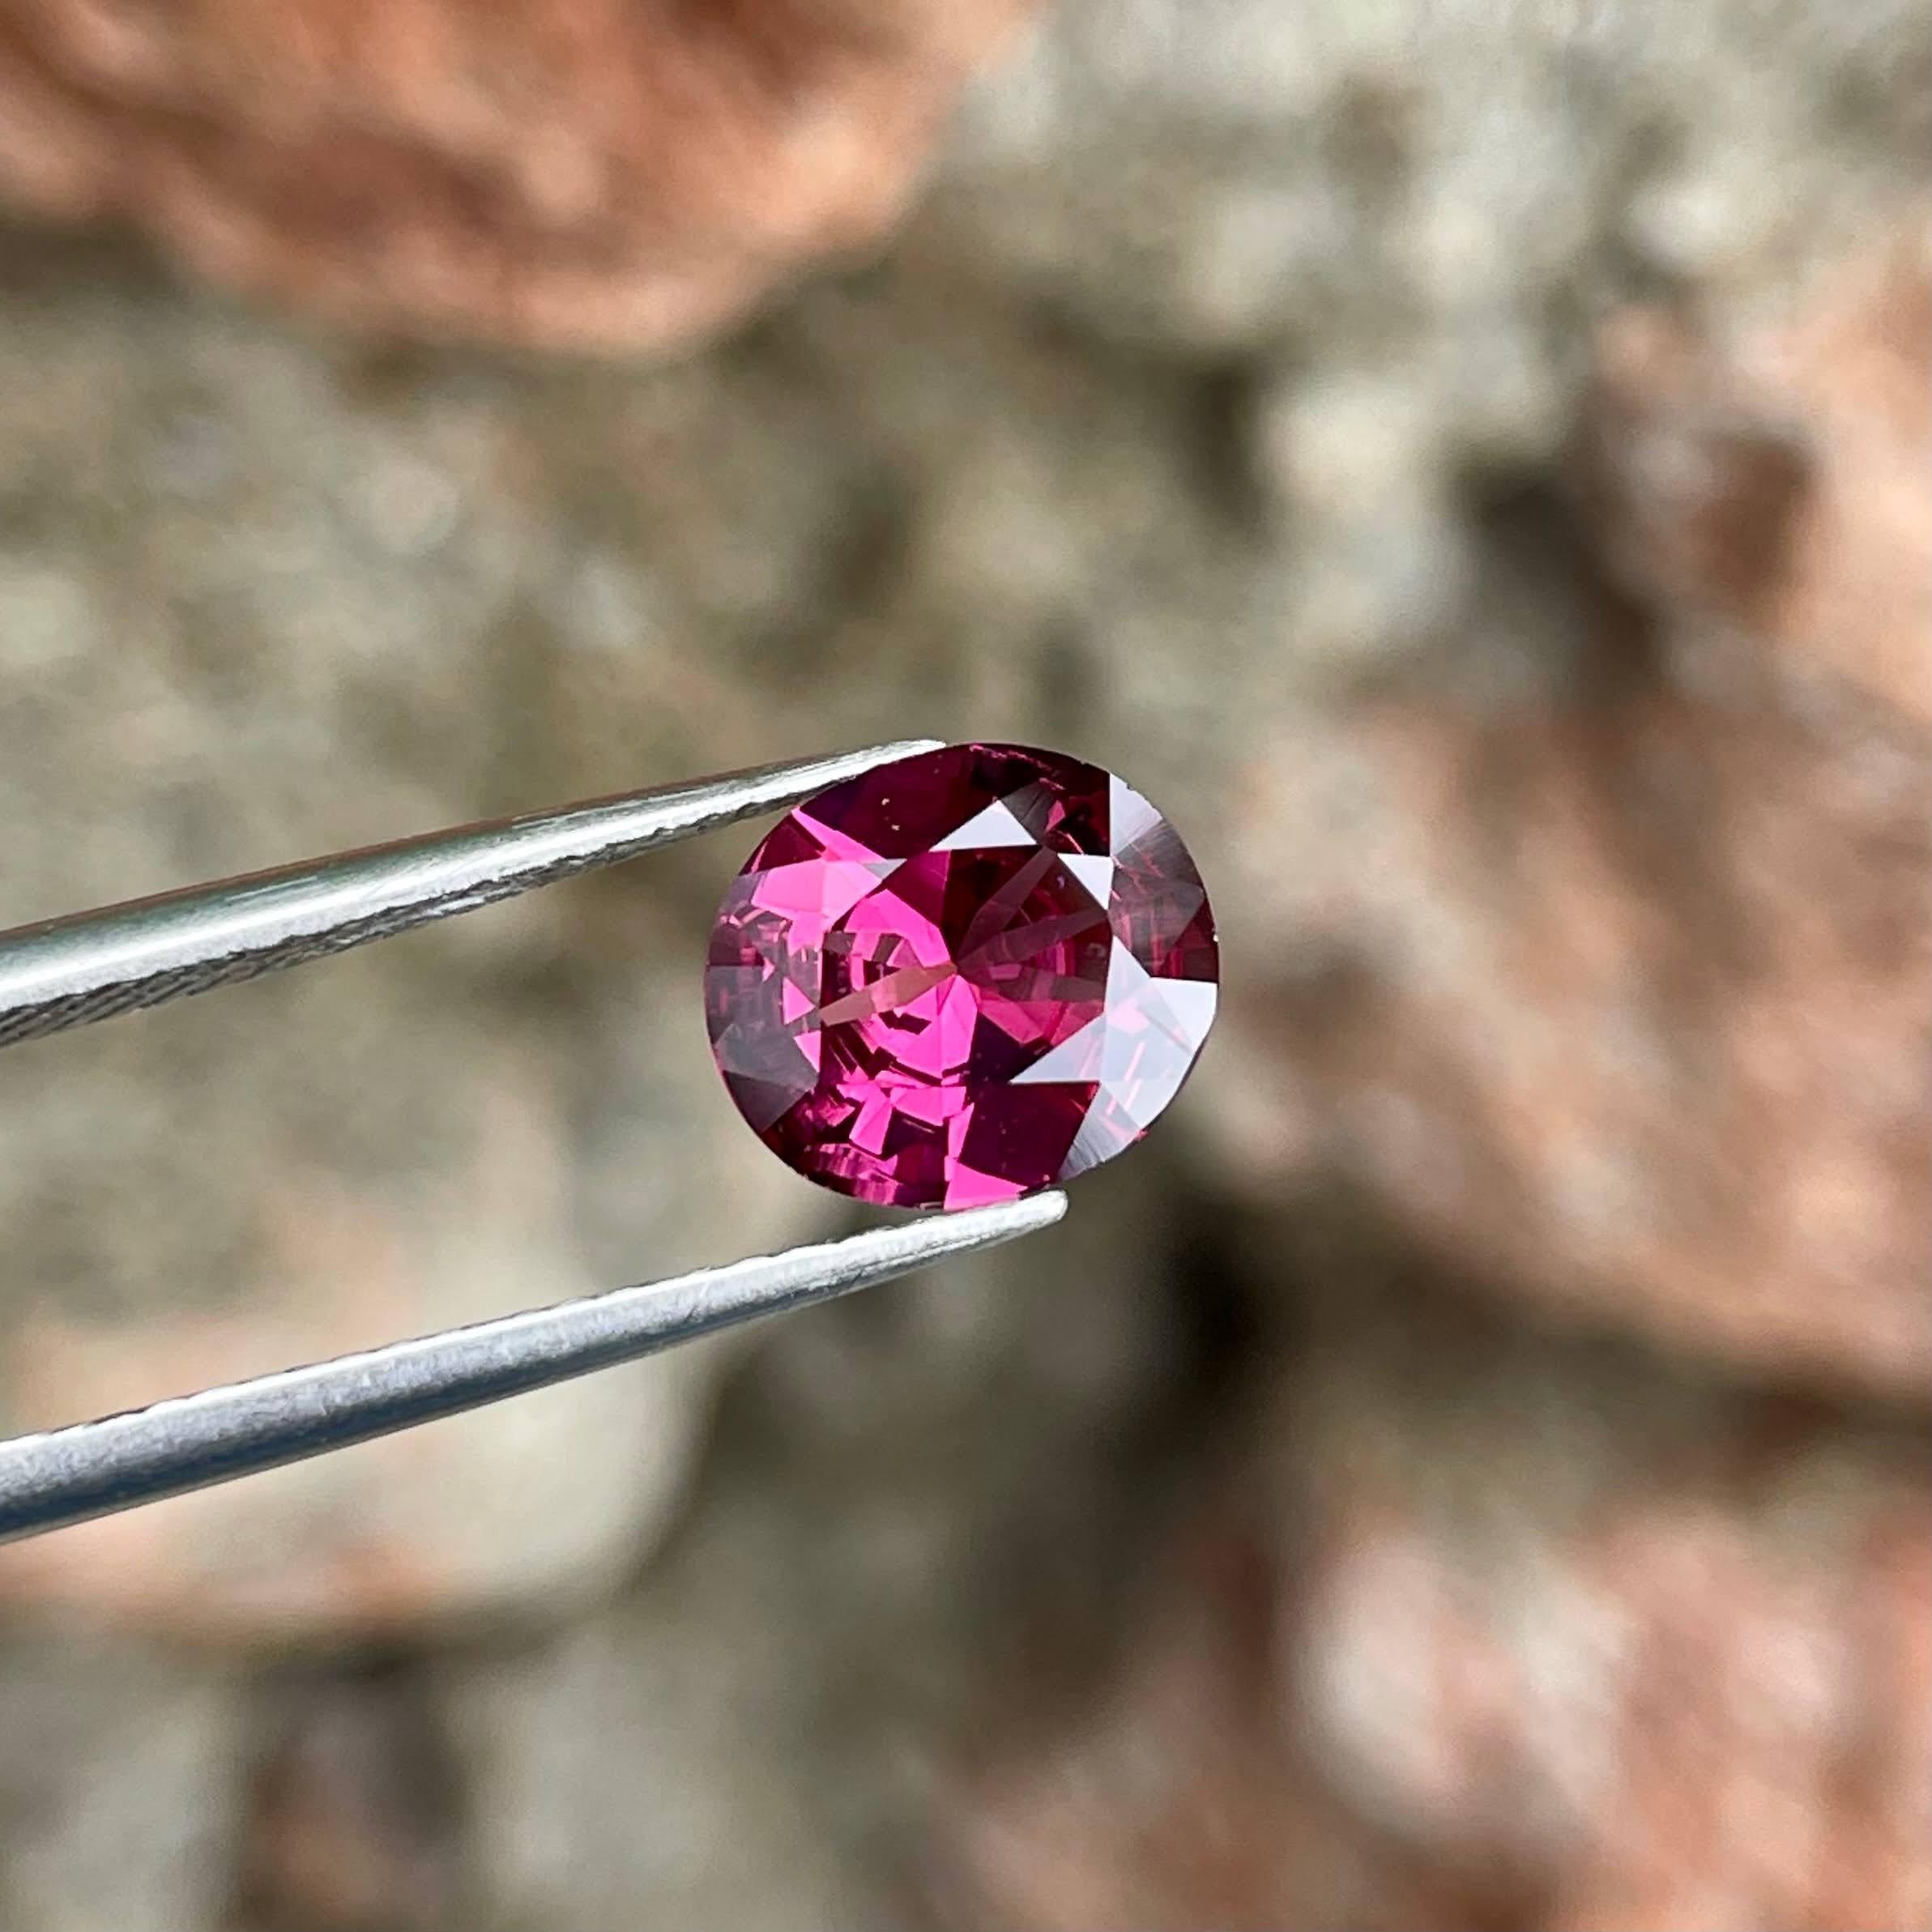 Weight 2.05 carats 
Dimensions 8.7x7.7x4.3 mm
Treatment none 
Origin Madagascar 
Clarity loupe clean 
Shape oval 
Cut fancy oval 




The Rich Pink Garnet Stone is a radiant gem of exquisite beauty, boasting a weighty 2.05 carats. Cut into a